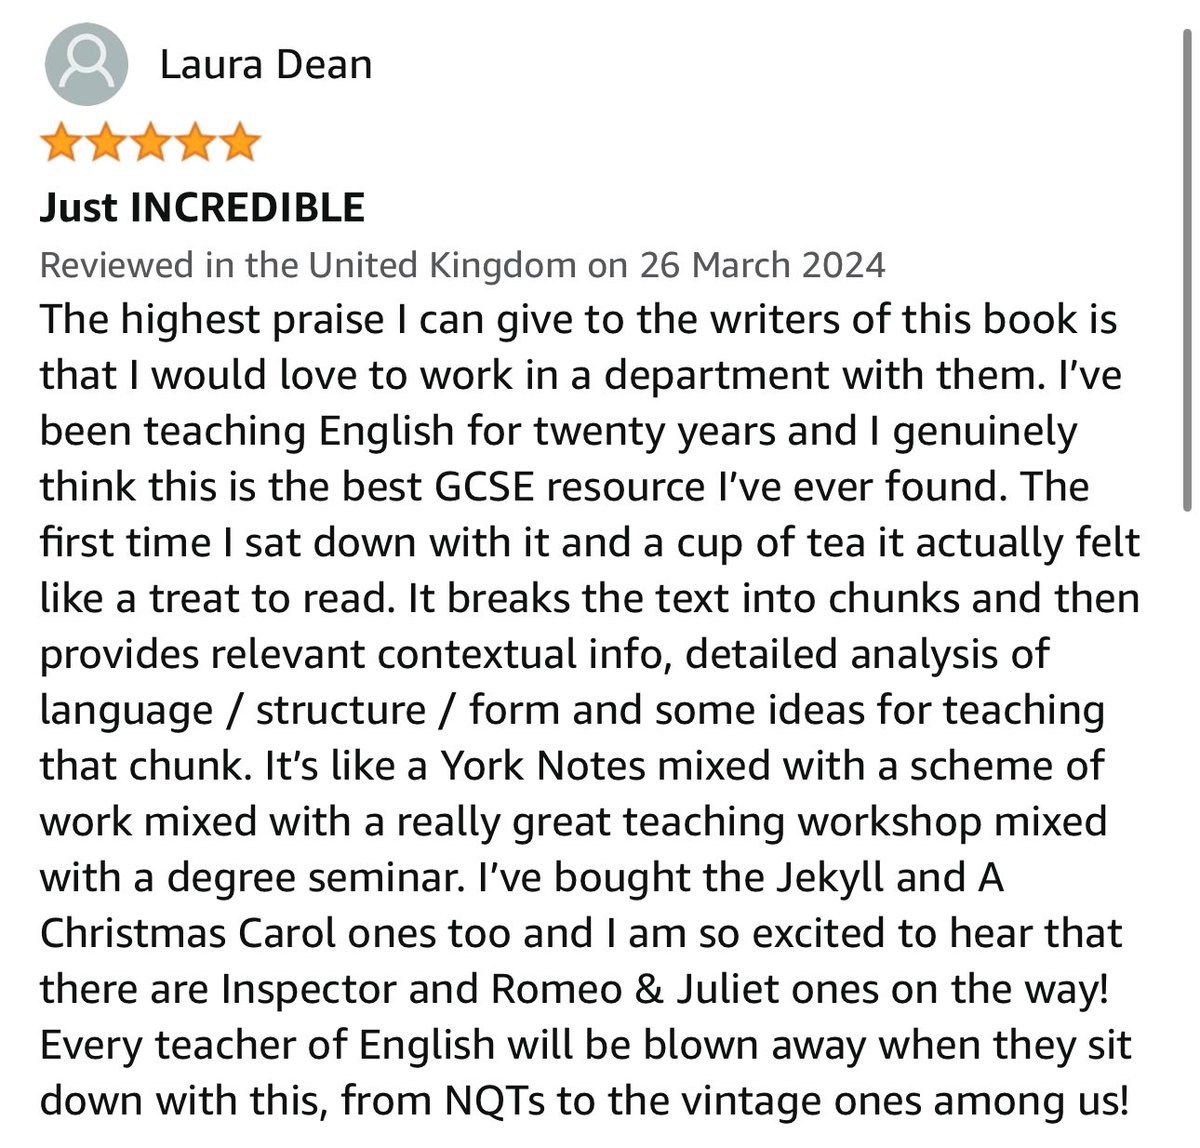 🎉600 reviews for our first book, ‘Ready to Teach: Macbeth’🎉. I wouldn’t usually post a review, but this - our 600th - perfectly encapsulated everything we wanted the book to be, and more, and we are so grateful for it. Thank you, Laura, for your EXTRAORDINARY words! @SPryke2…